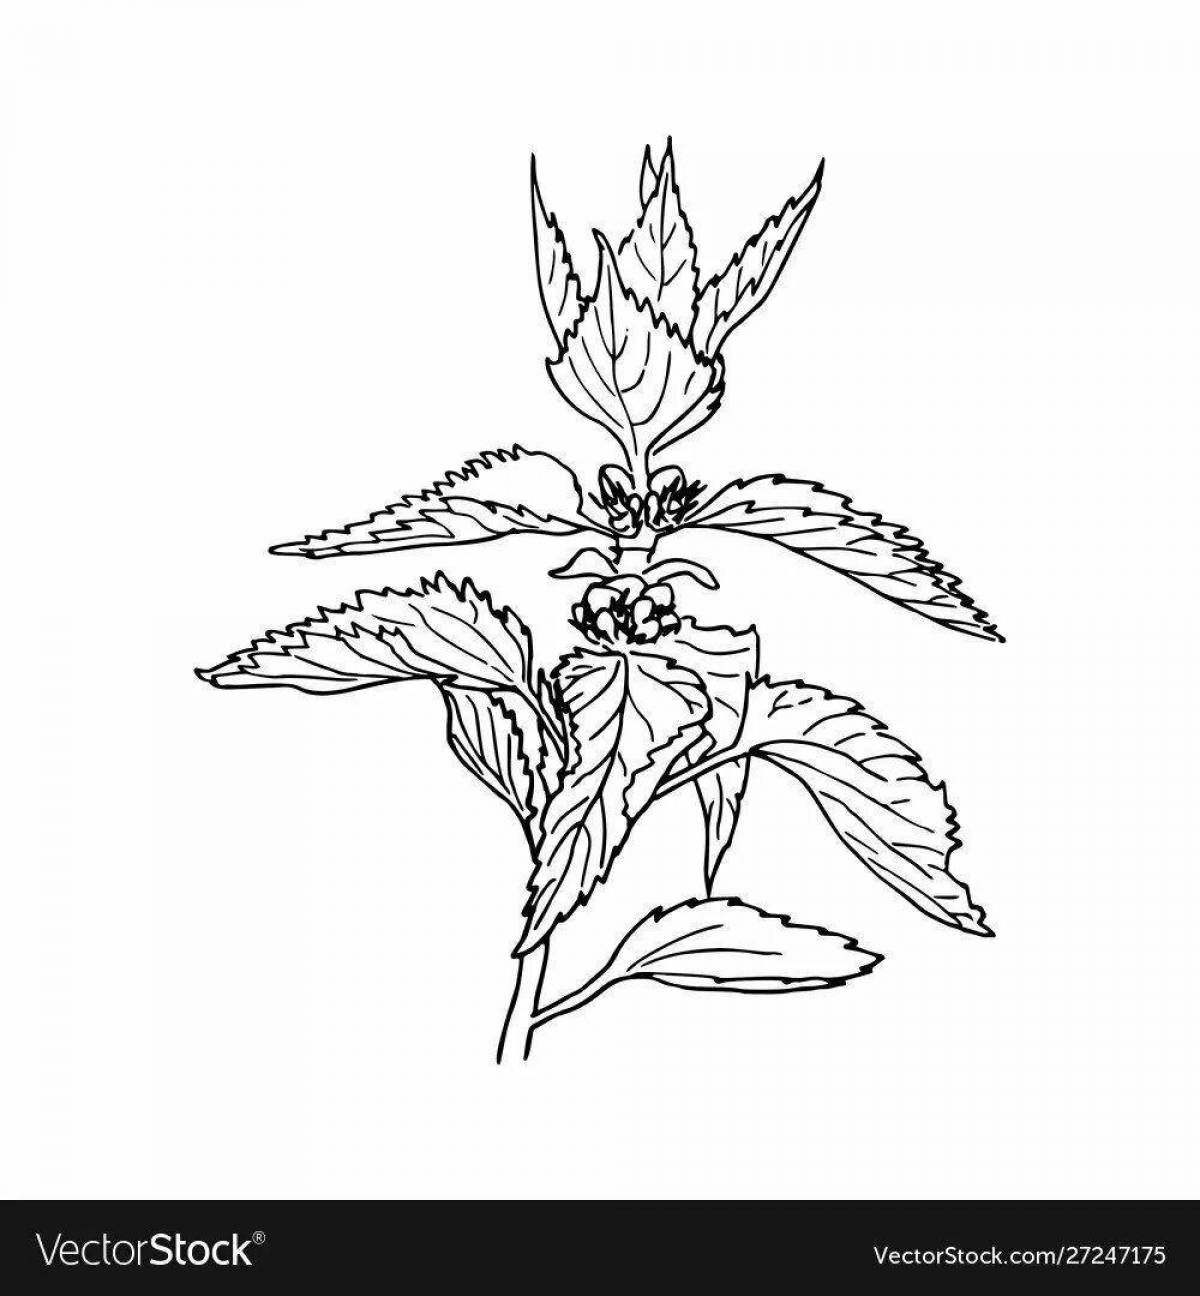 Student Shining Nettle Coloring Page